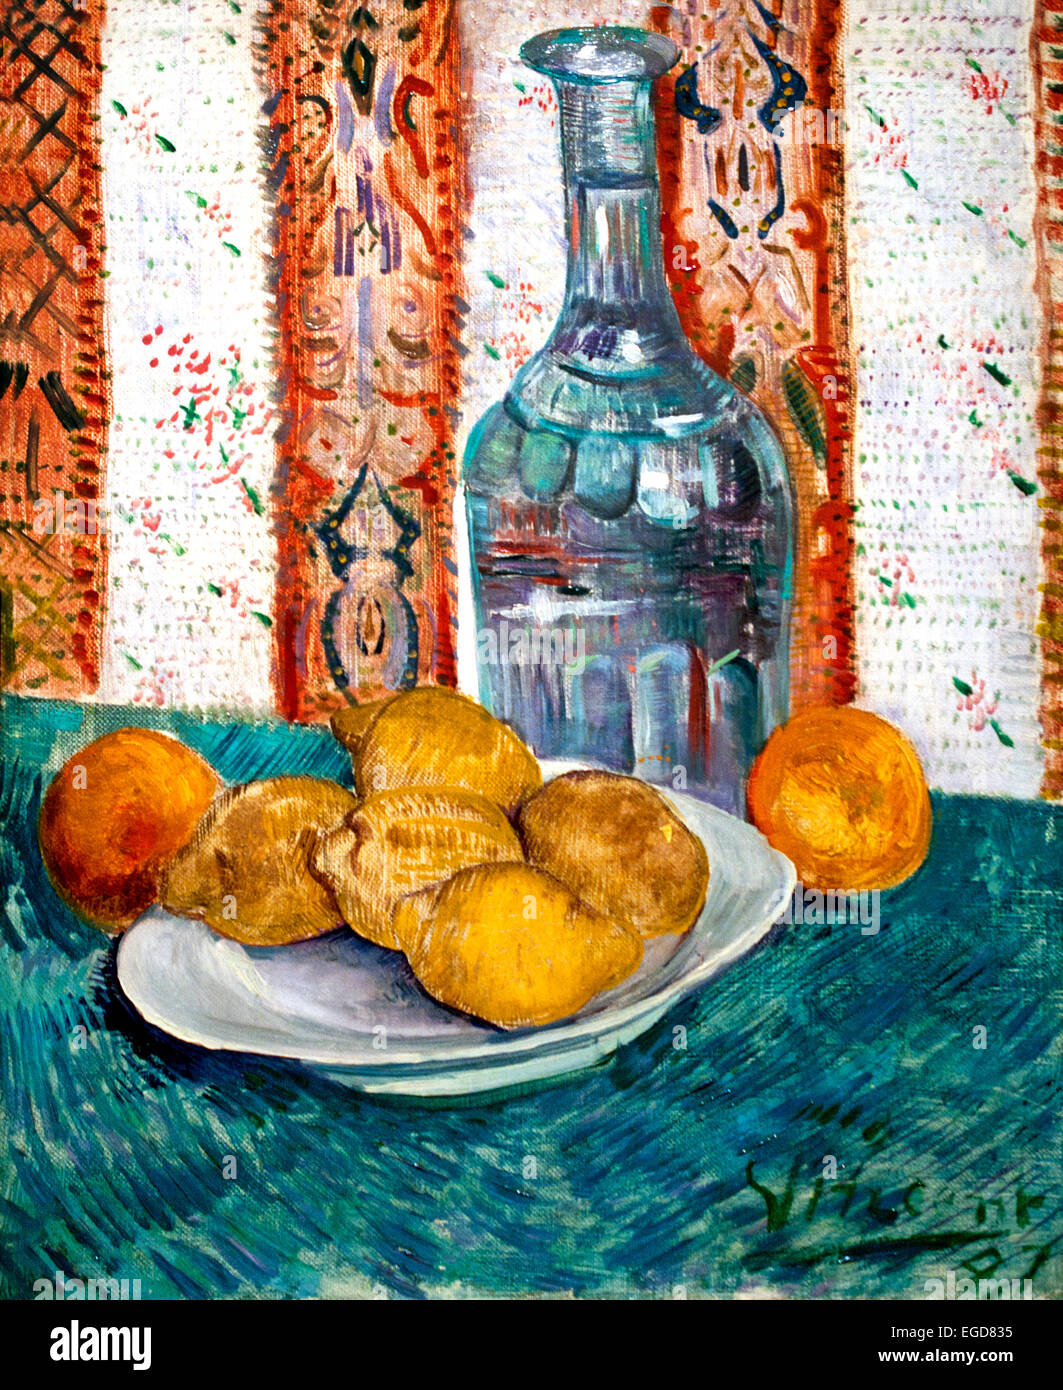 Still Life with Decanter and Lemons on a Plate 1887 Vincent van Gogh 1853 - 1890  Dutch Netherlands Post Impressionism Stock Photo